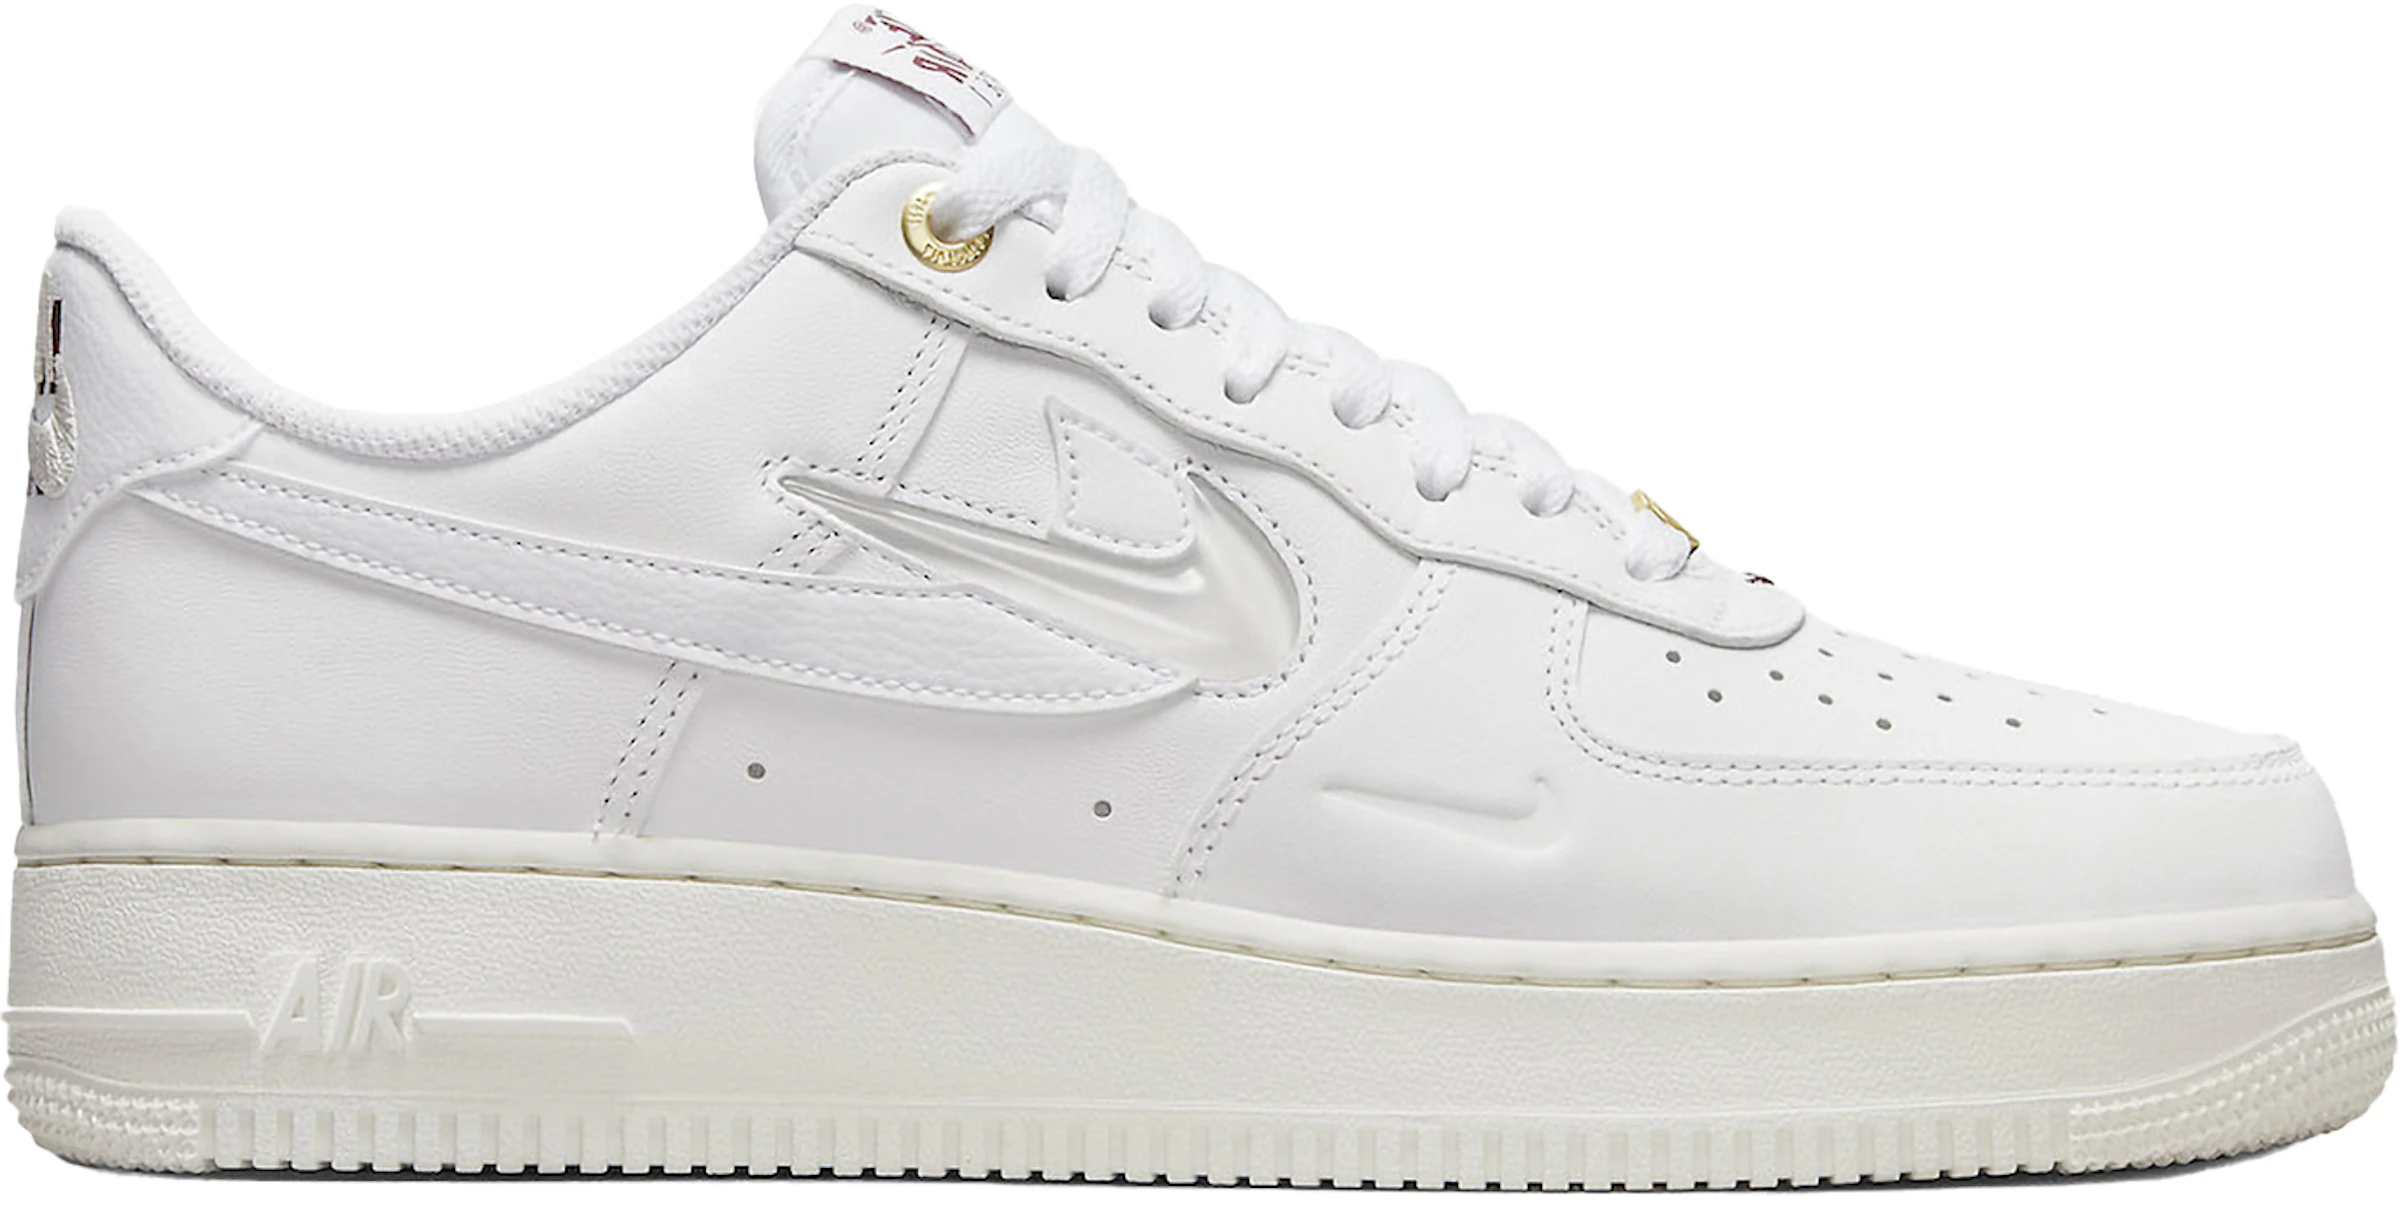 Nike Air Force 1 Low '07 LV8 Forces Sail - DQ7664-100 - ES